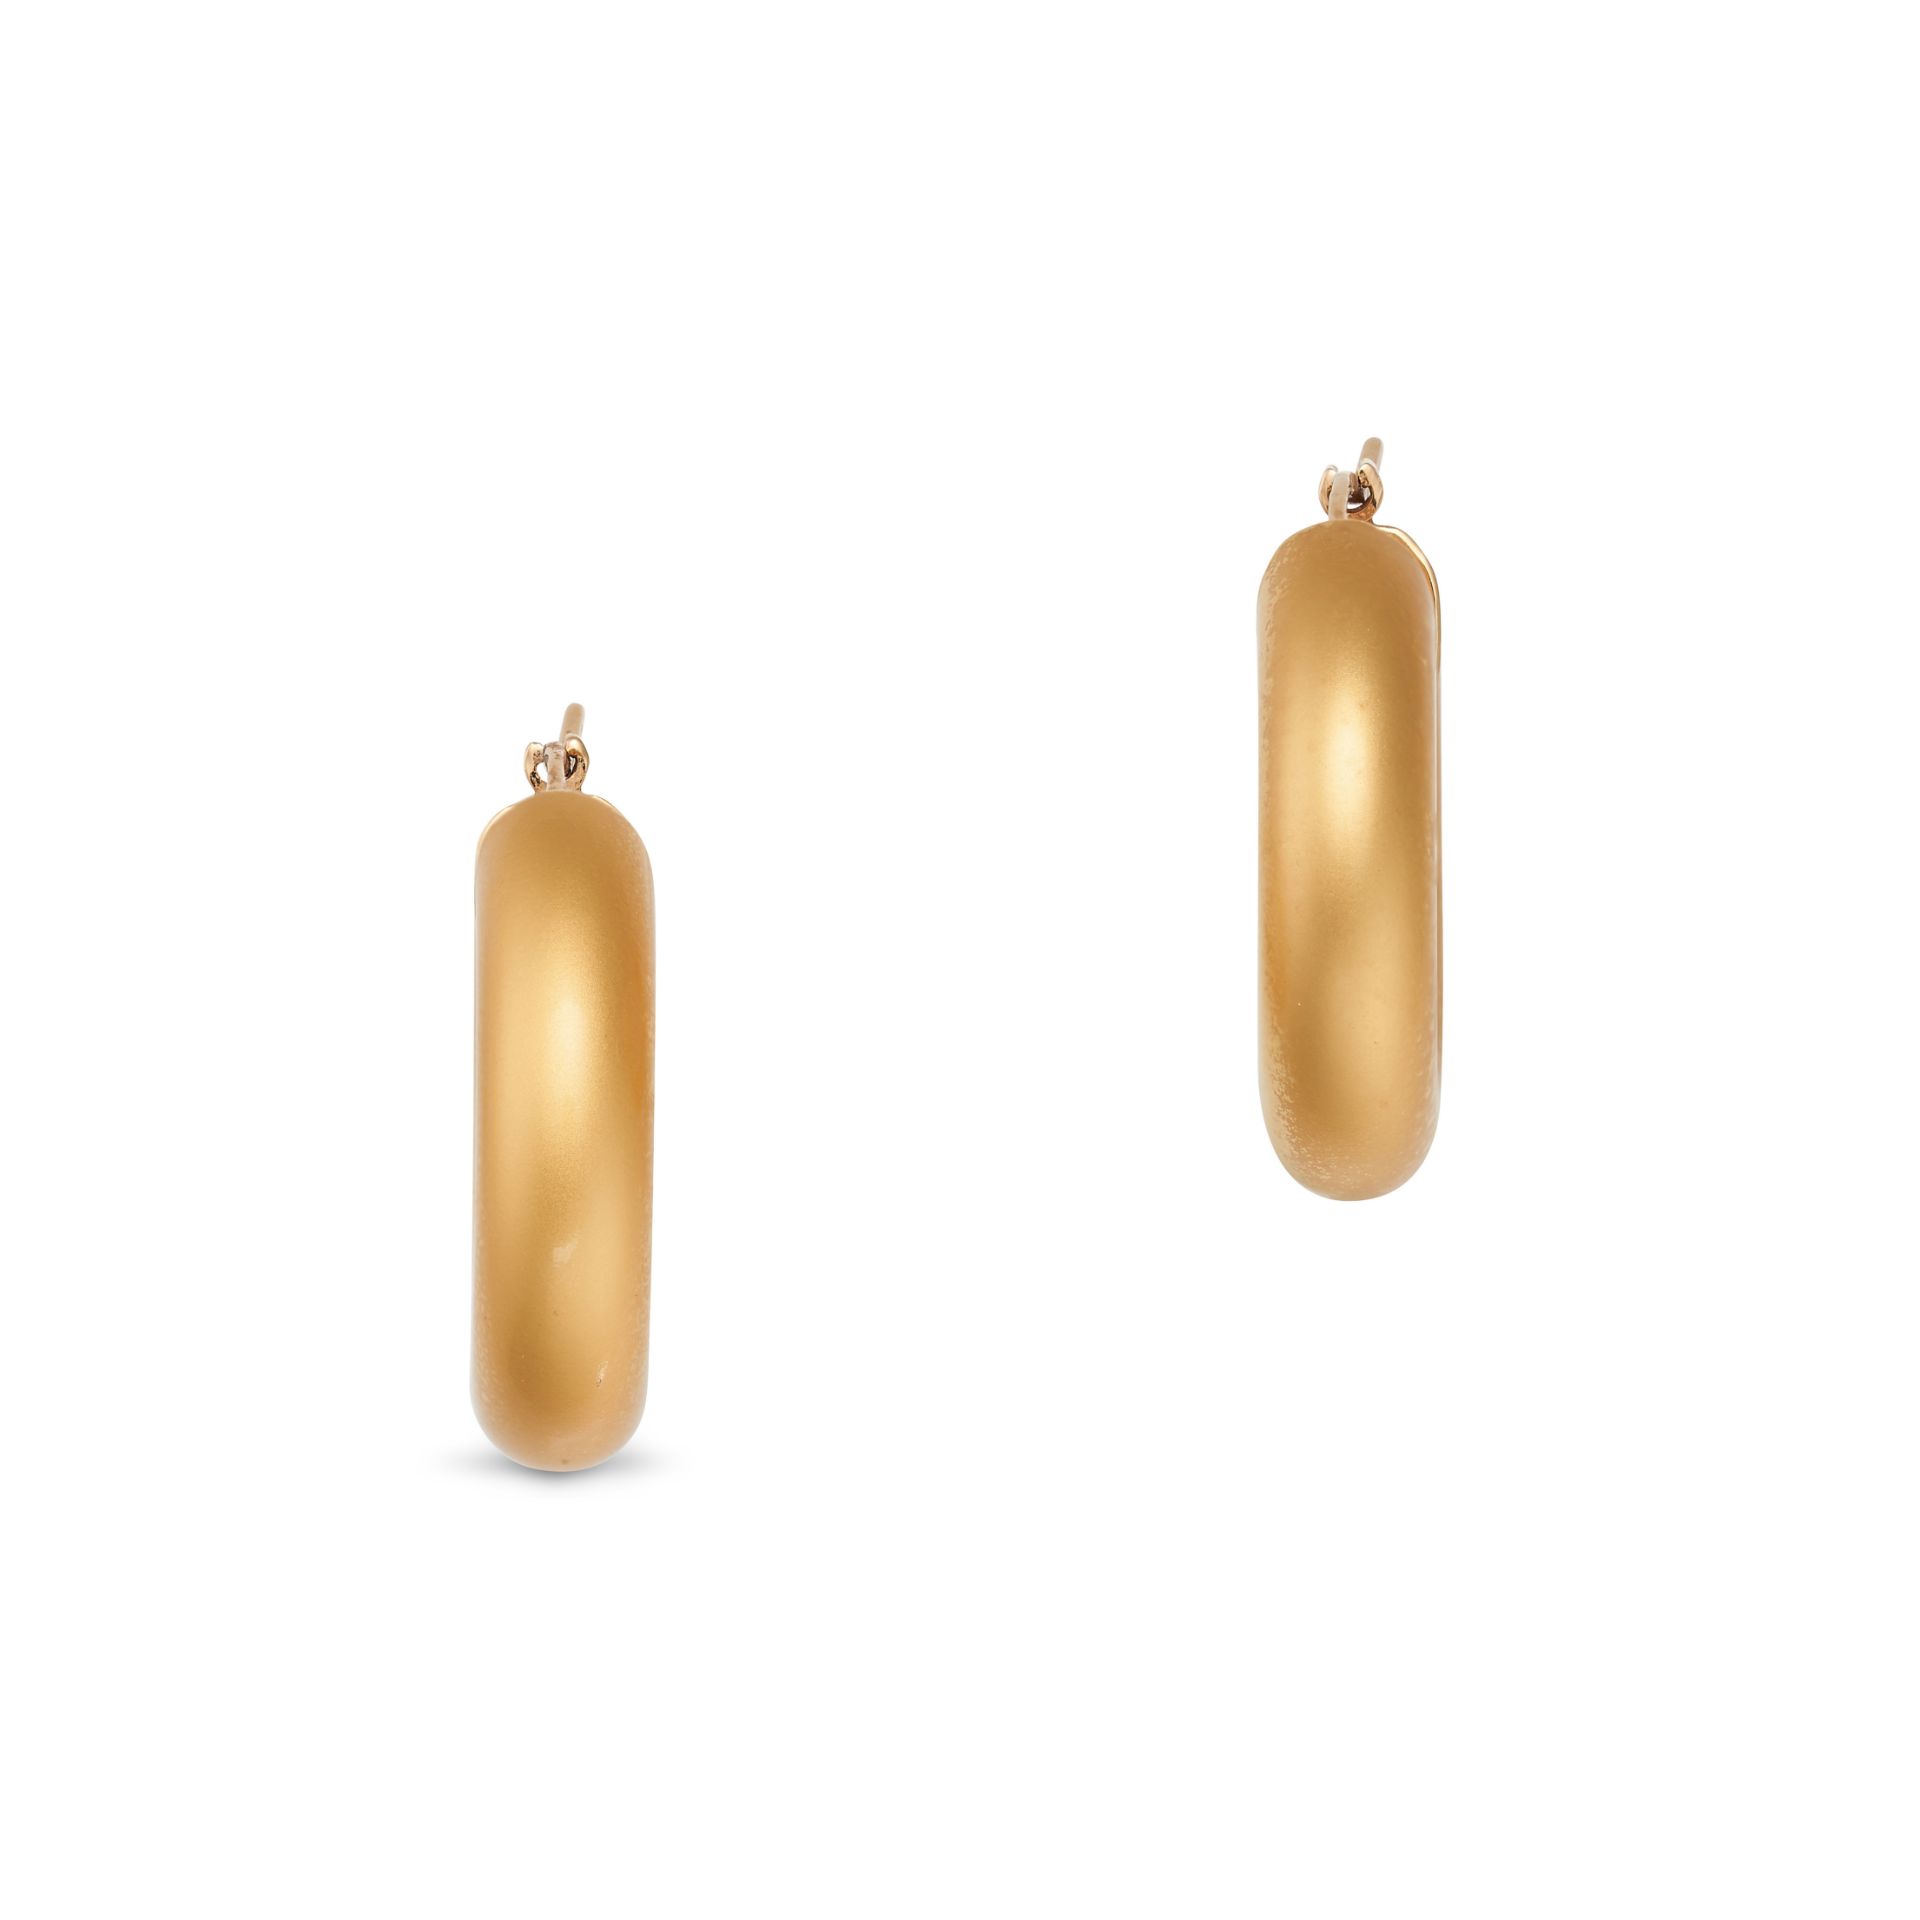 CHARLES GAUET, A PAIR OF GOLD HOOP EARRINGS in 18ct yellow gold, designed as a polished gold hoop...